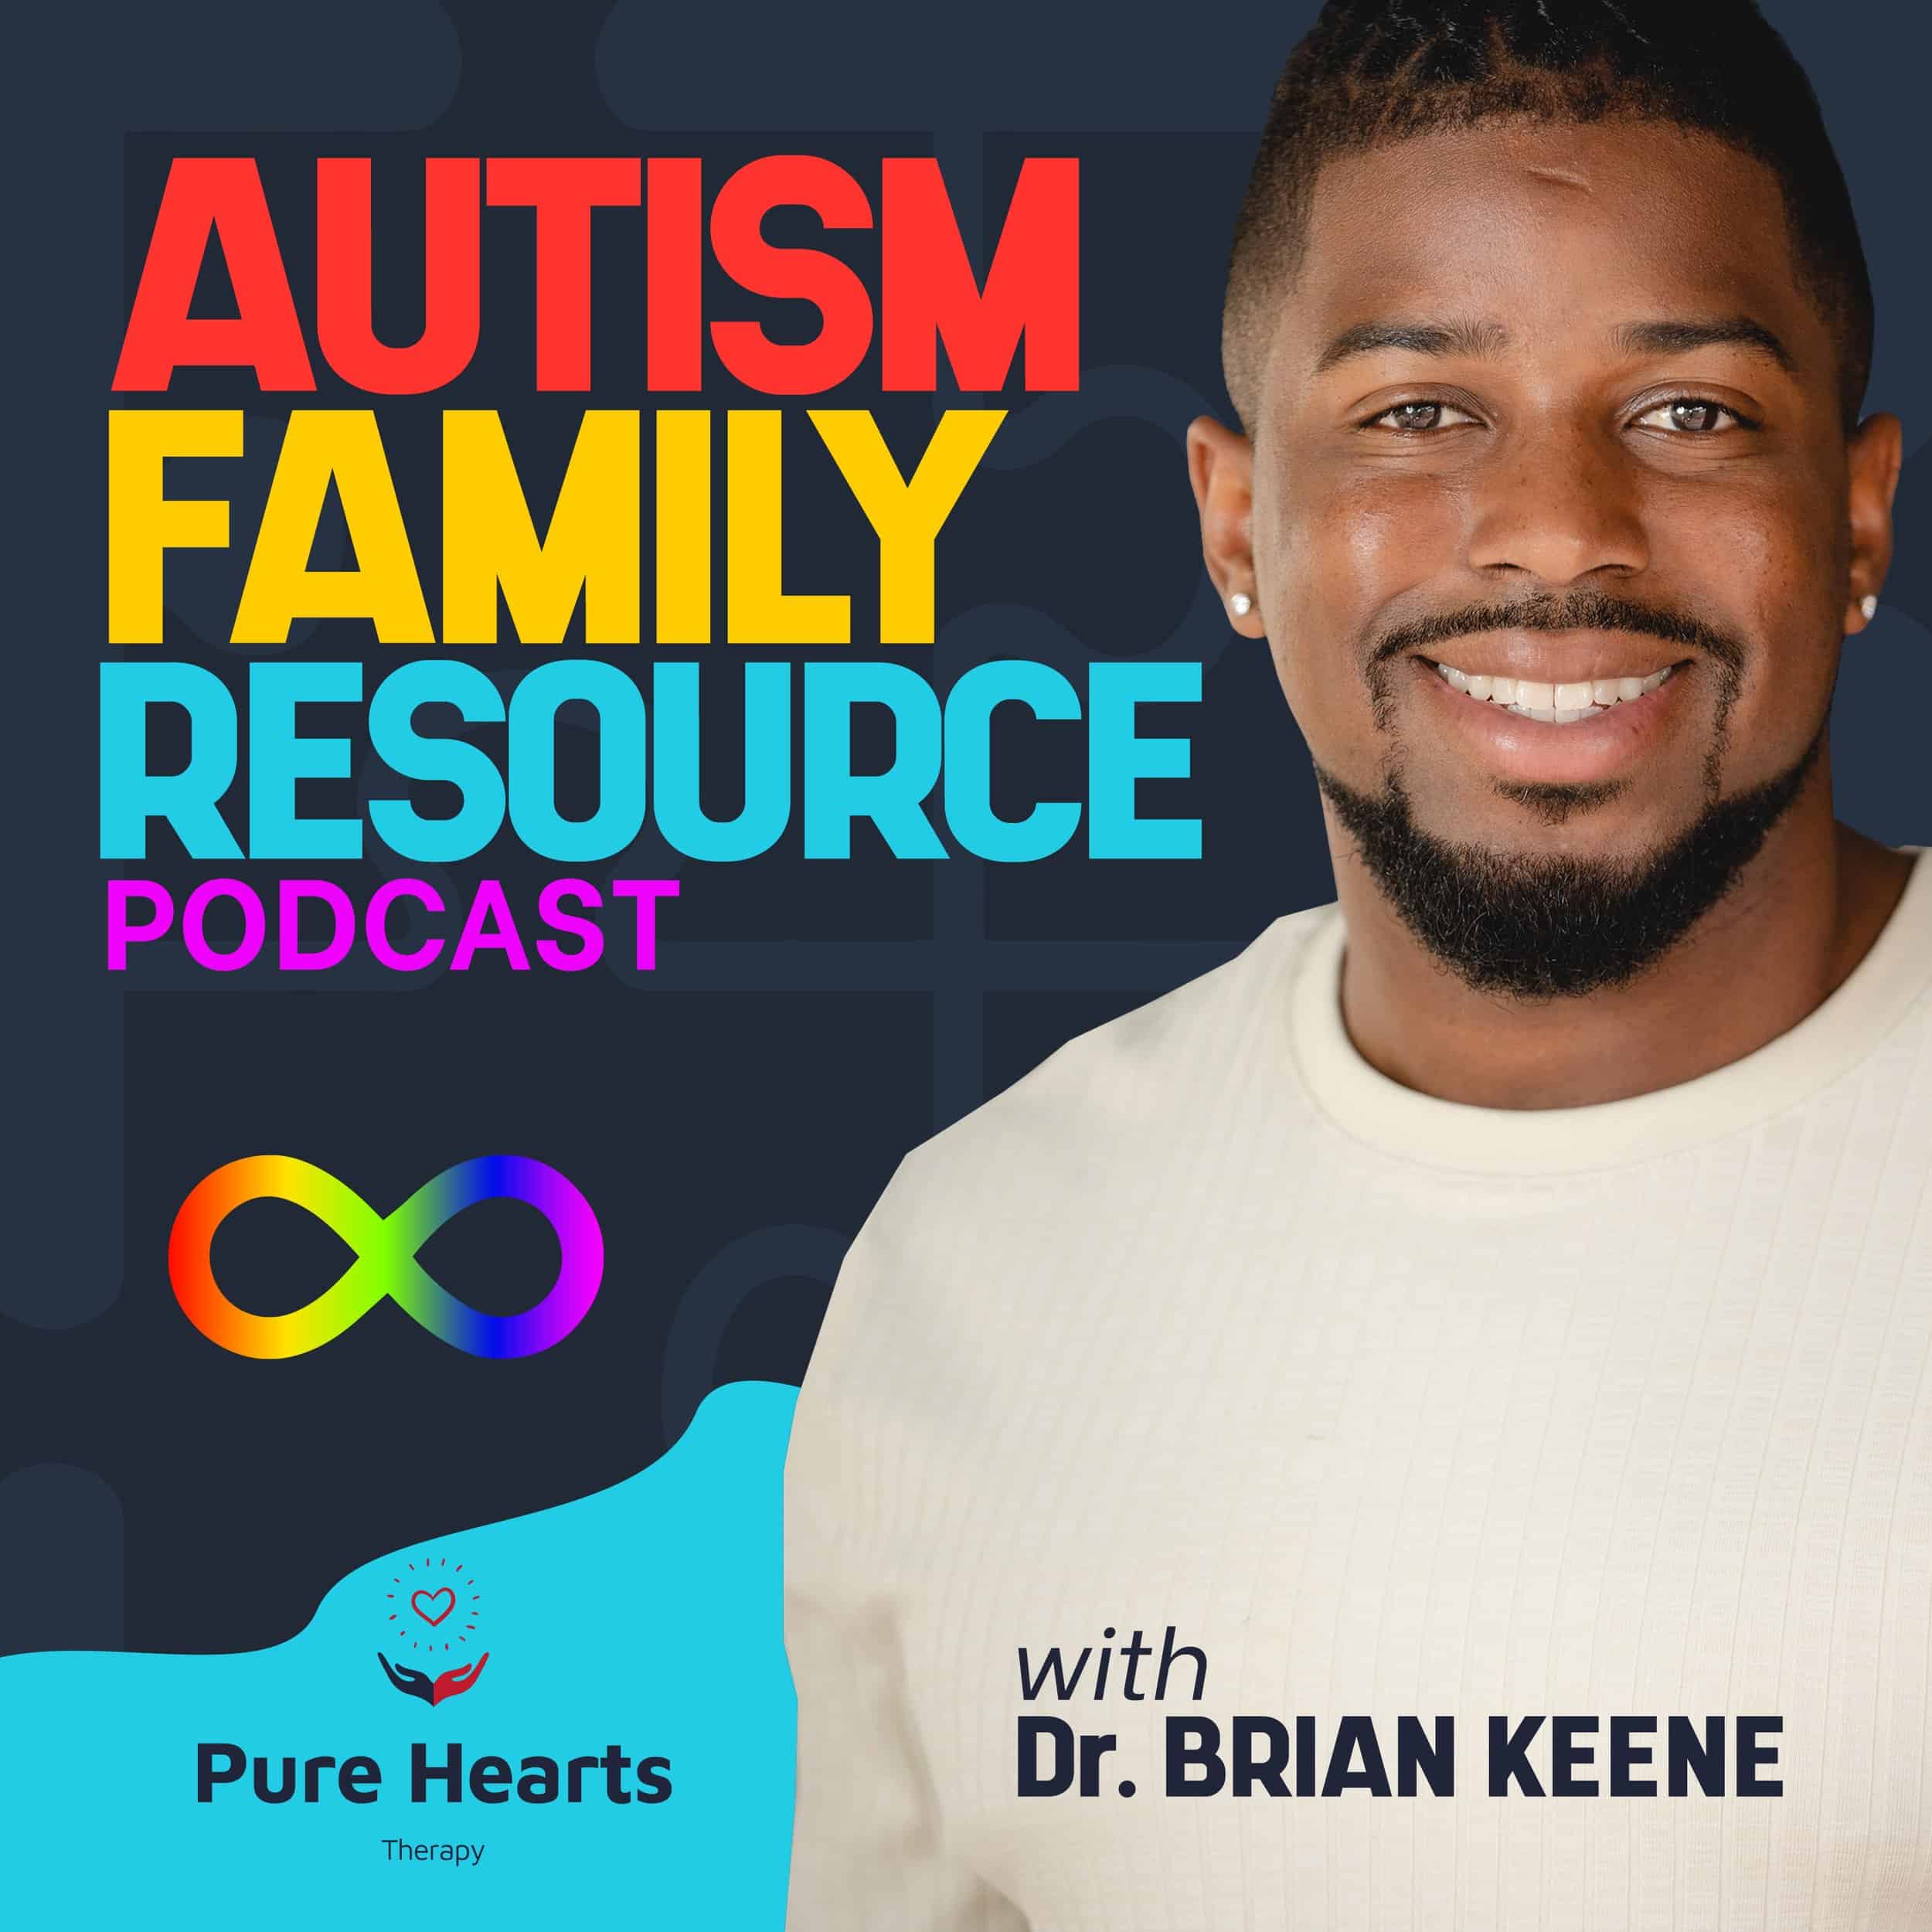 Autism Family Resource podcast